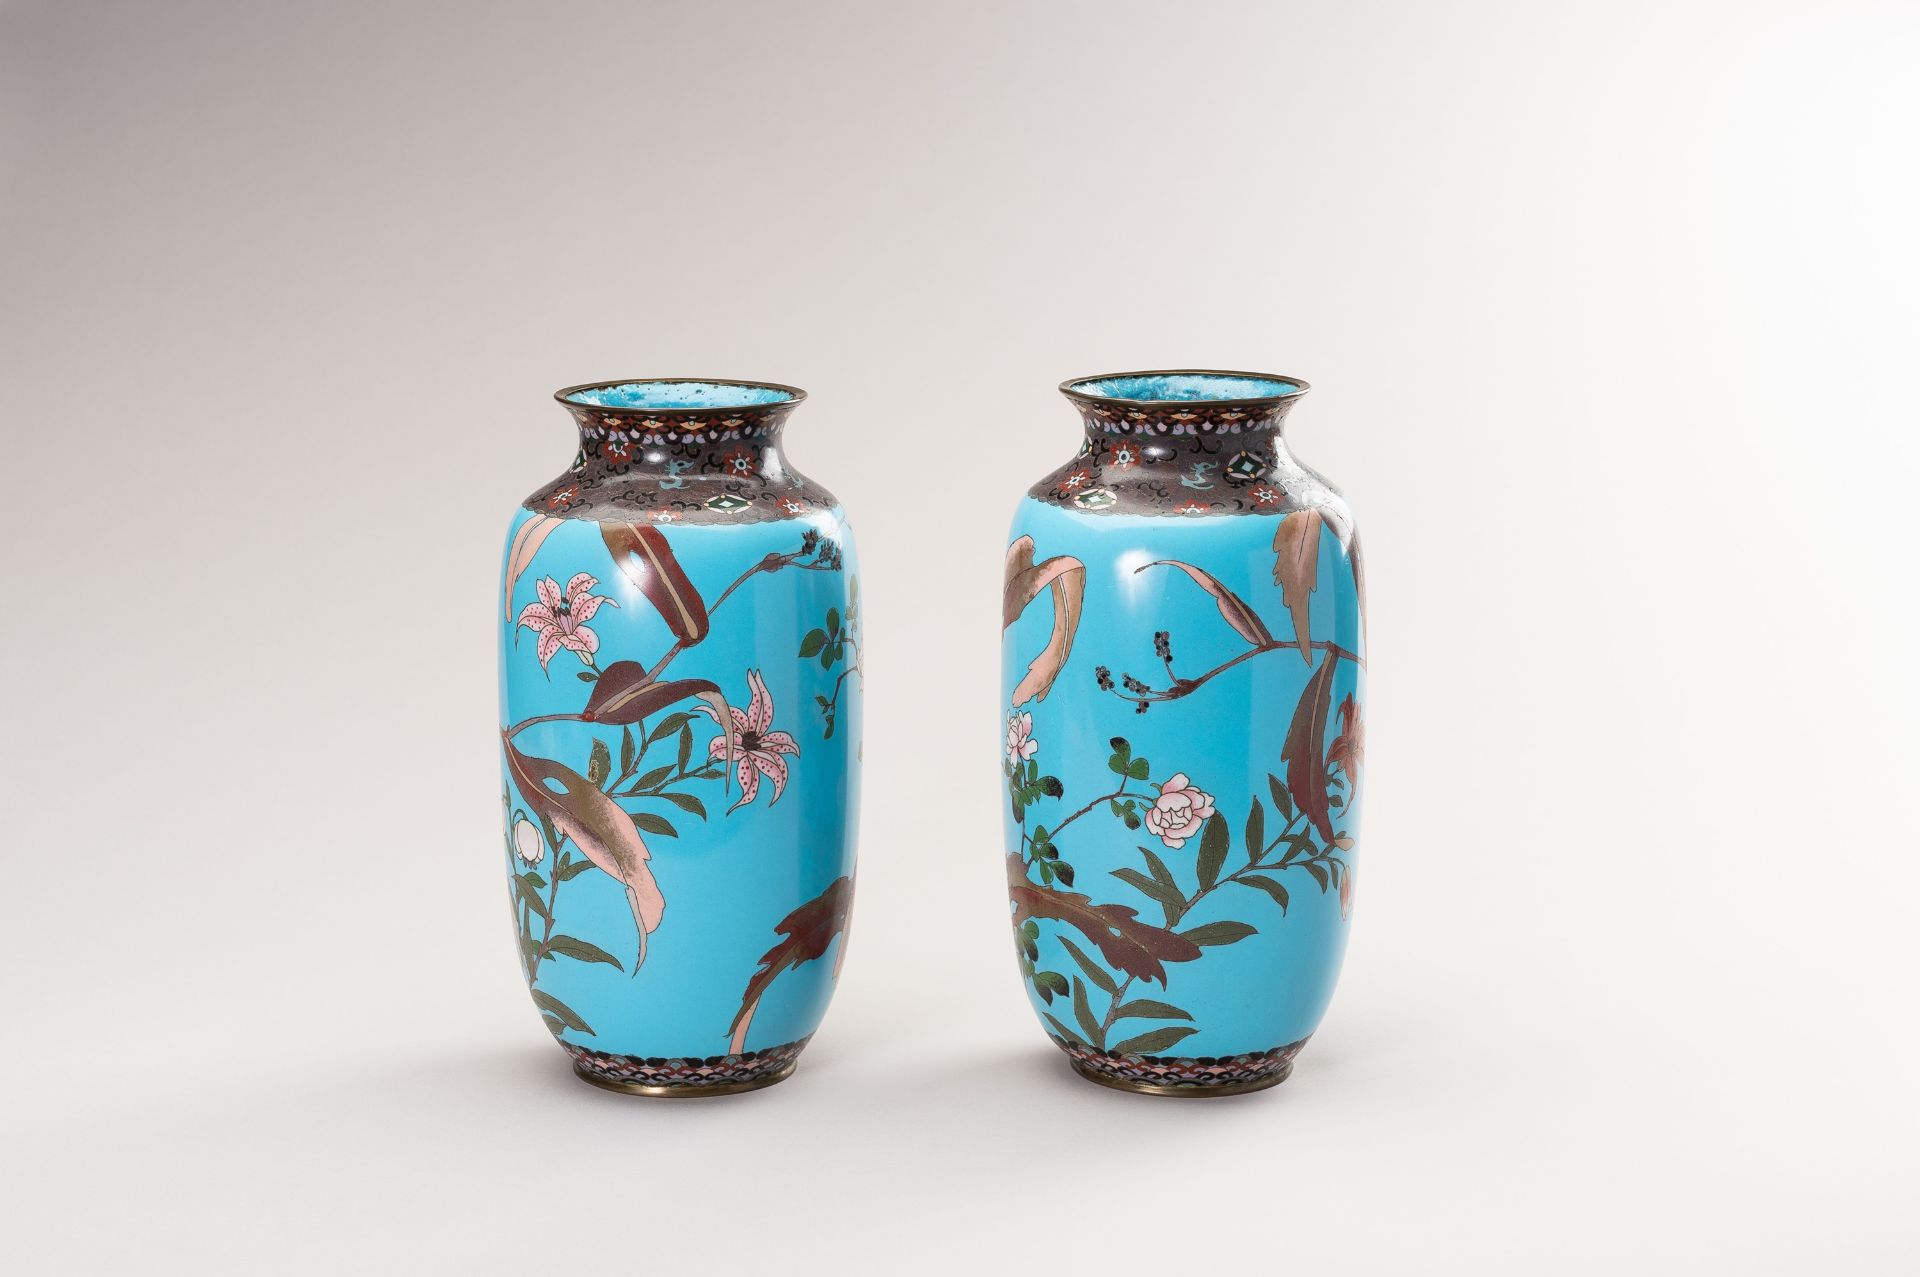 A PAIR OF TWO CLOISONNE VASES WITH BIRDS AND FLOWERS - Image 7 of 11